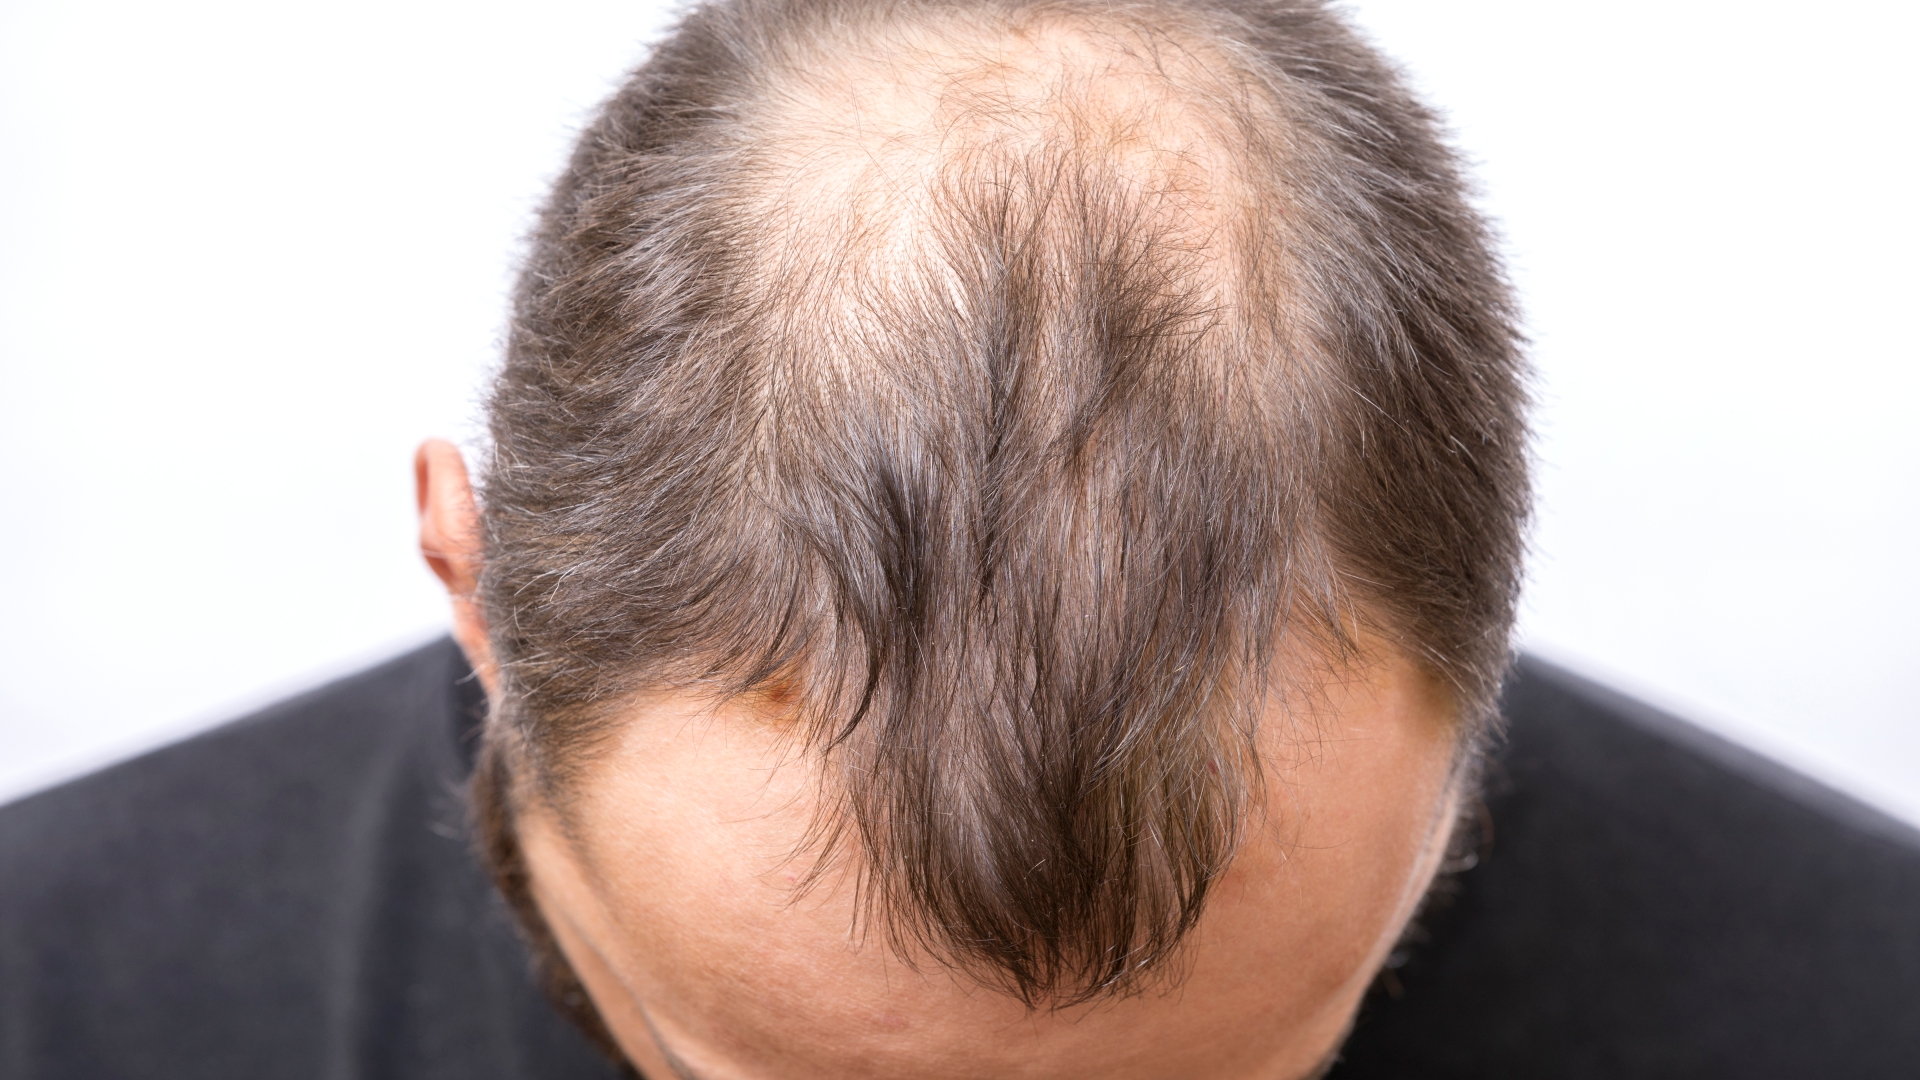 How a simple patch could help 'cure' baldness - giving hope to thousands